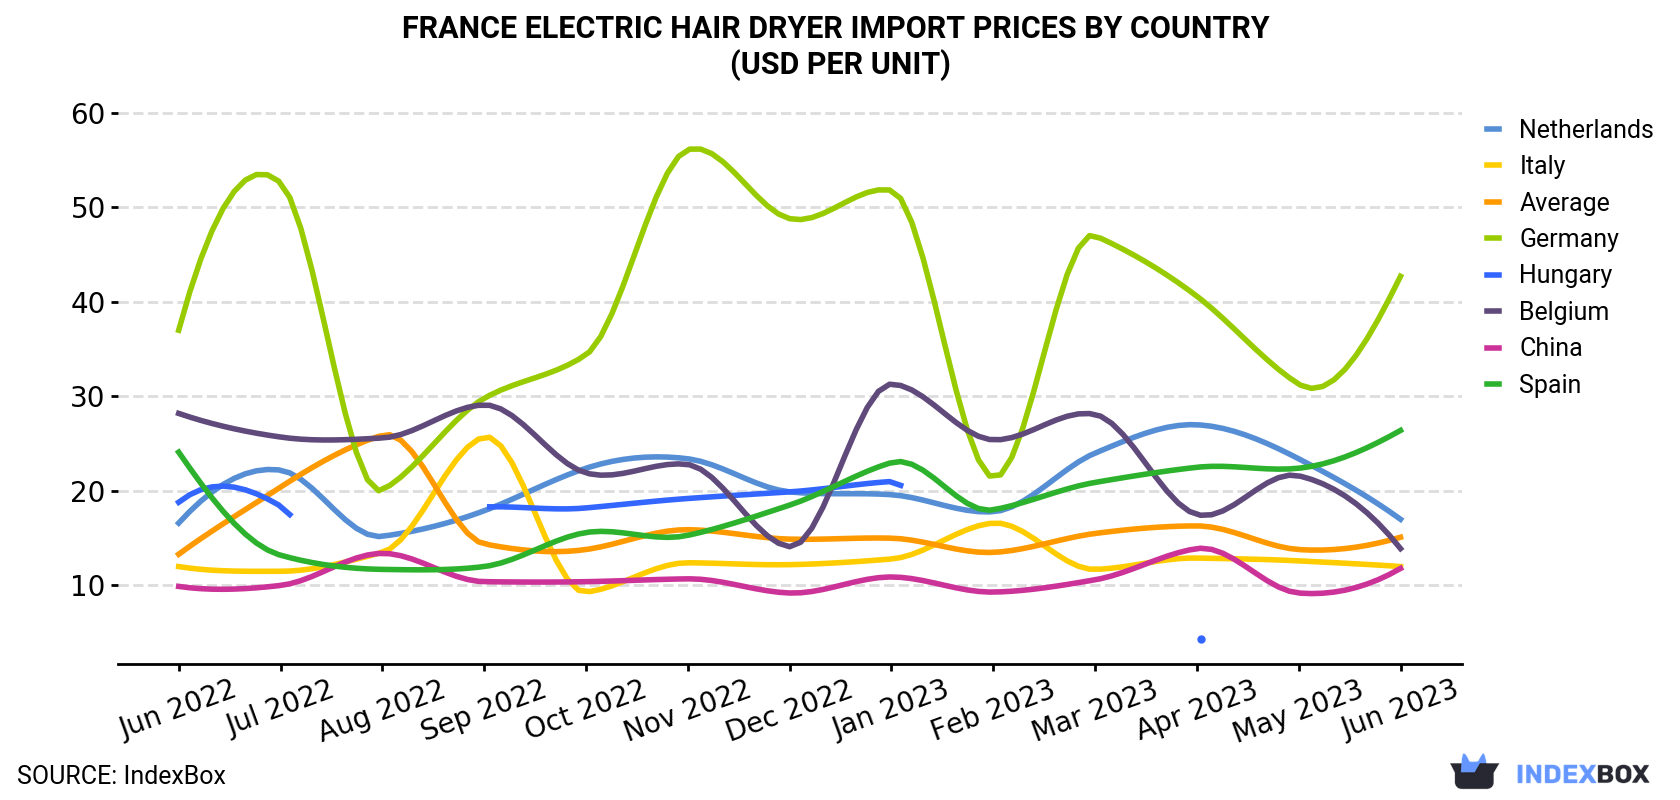 France Electric Hair Dryer Import Prices By Country (USD Per Unit)